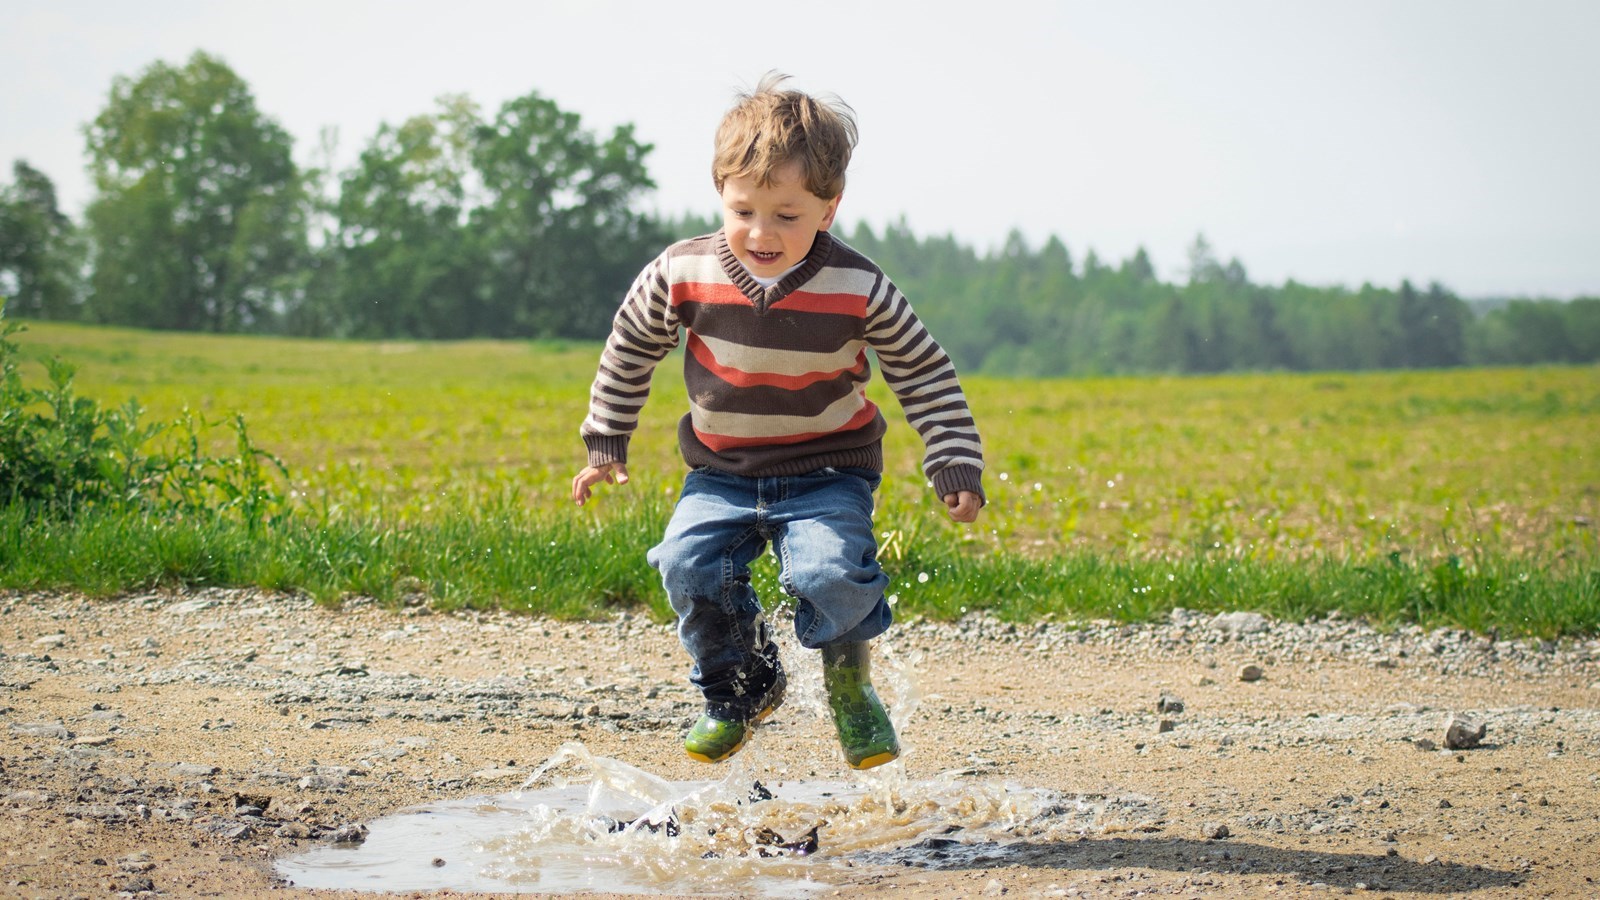 Boy%20jumping%20in%20puddle-2.jpg